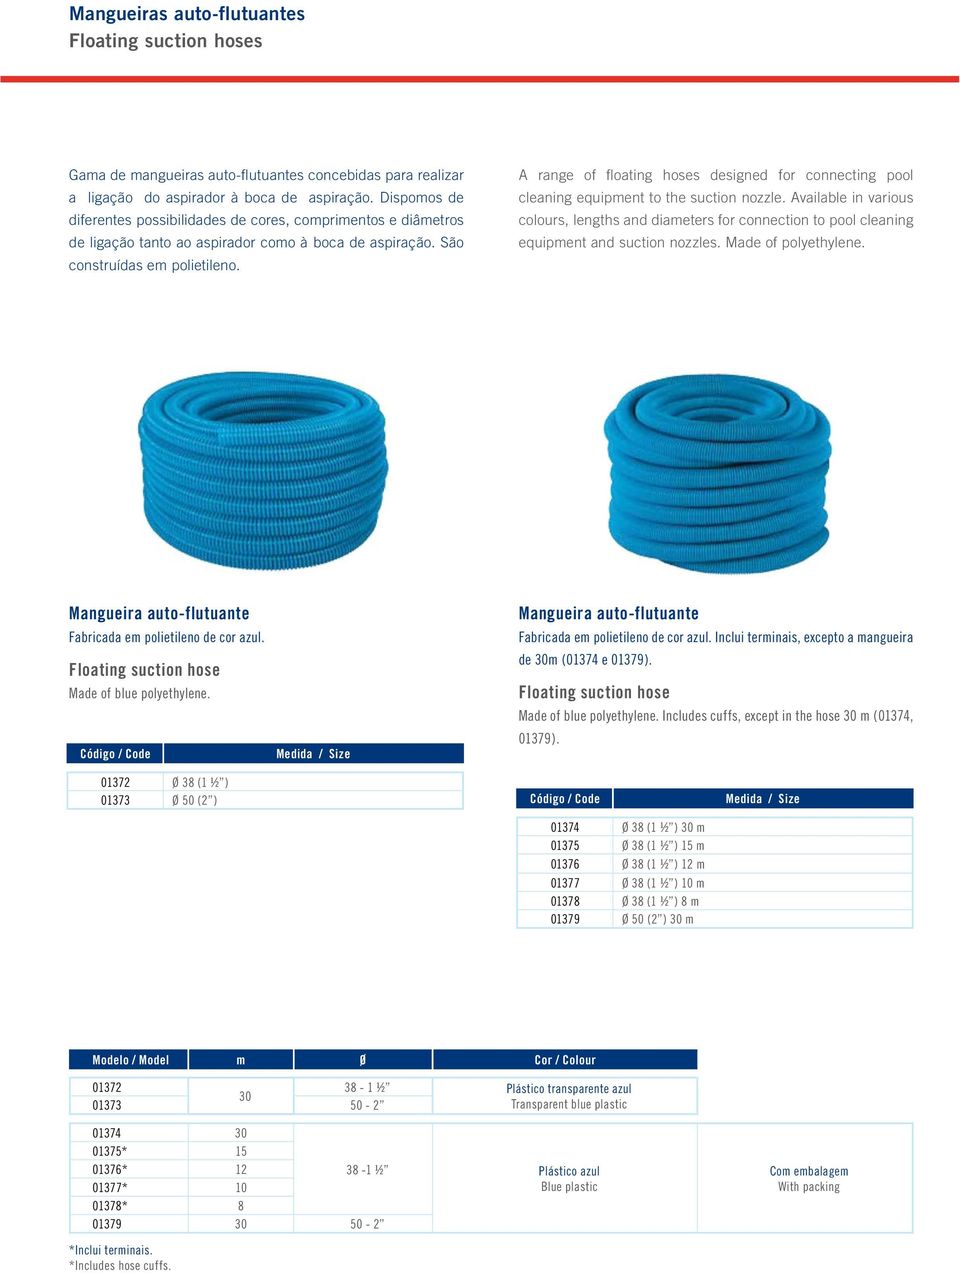 A range of floating hoses designed for connecting pool cleaning equipment to the suction nozzle.